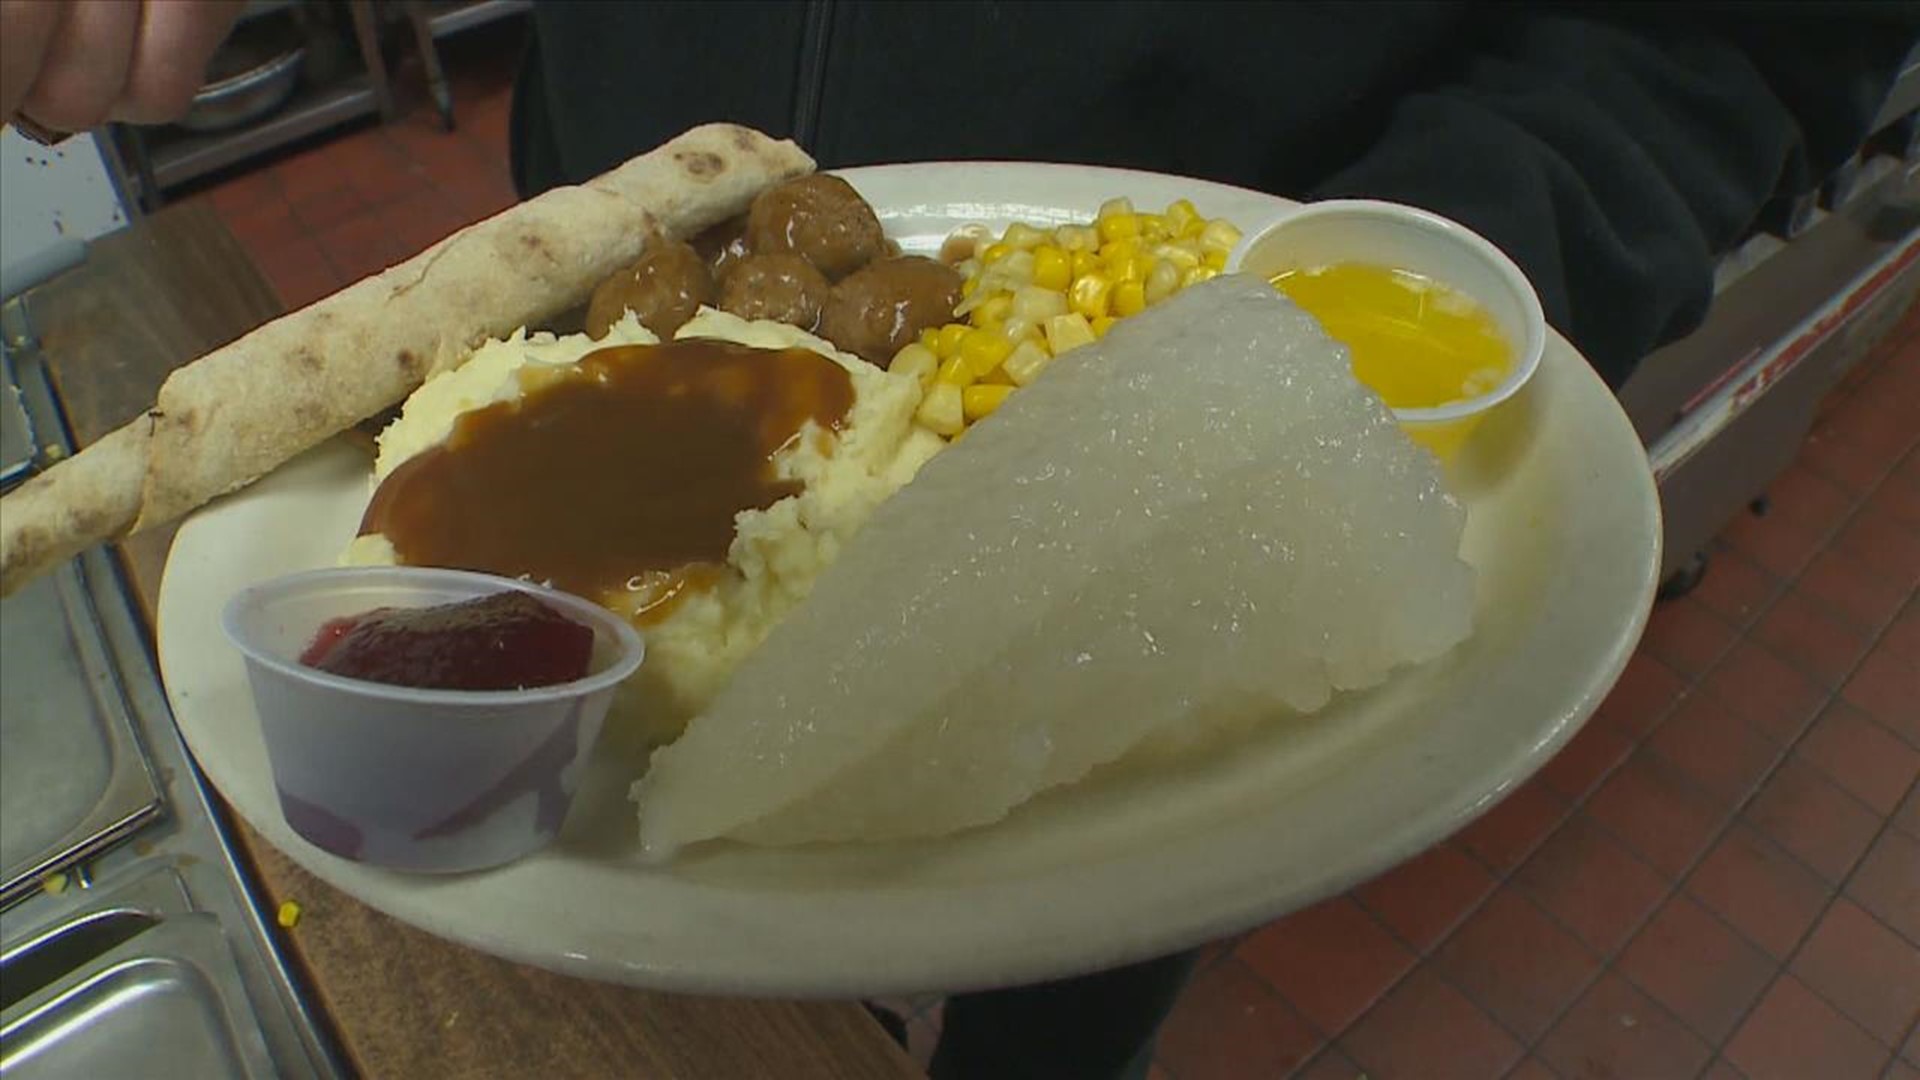 Minnesota church ends 70year tradition of lutefisk dinner